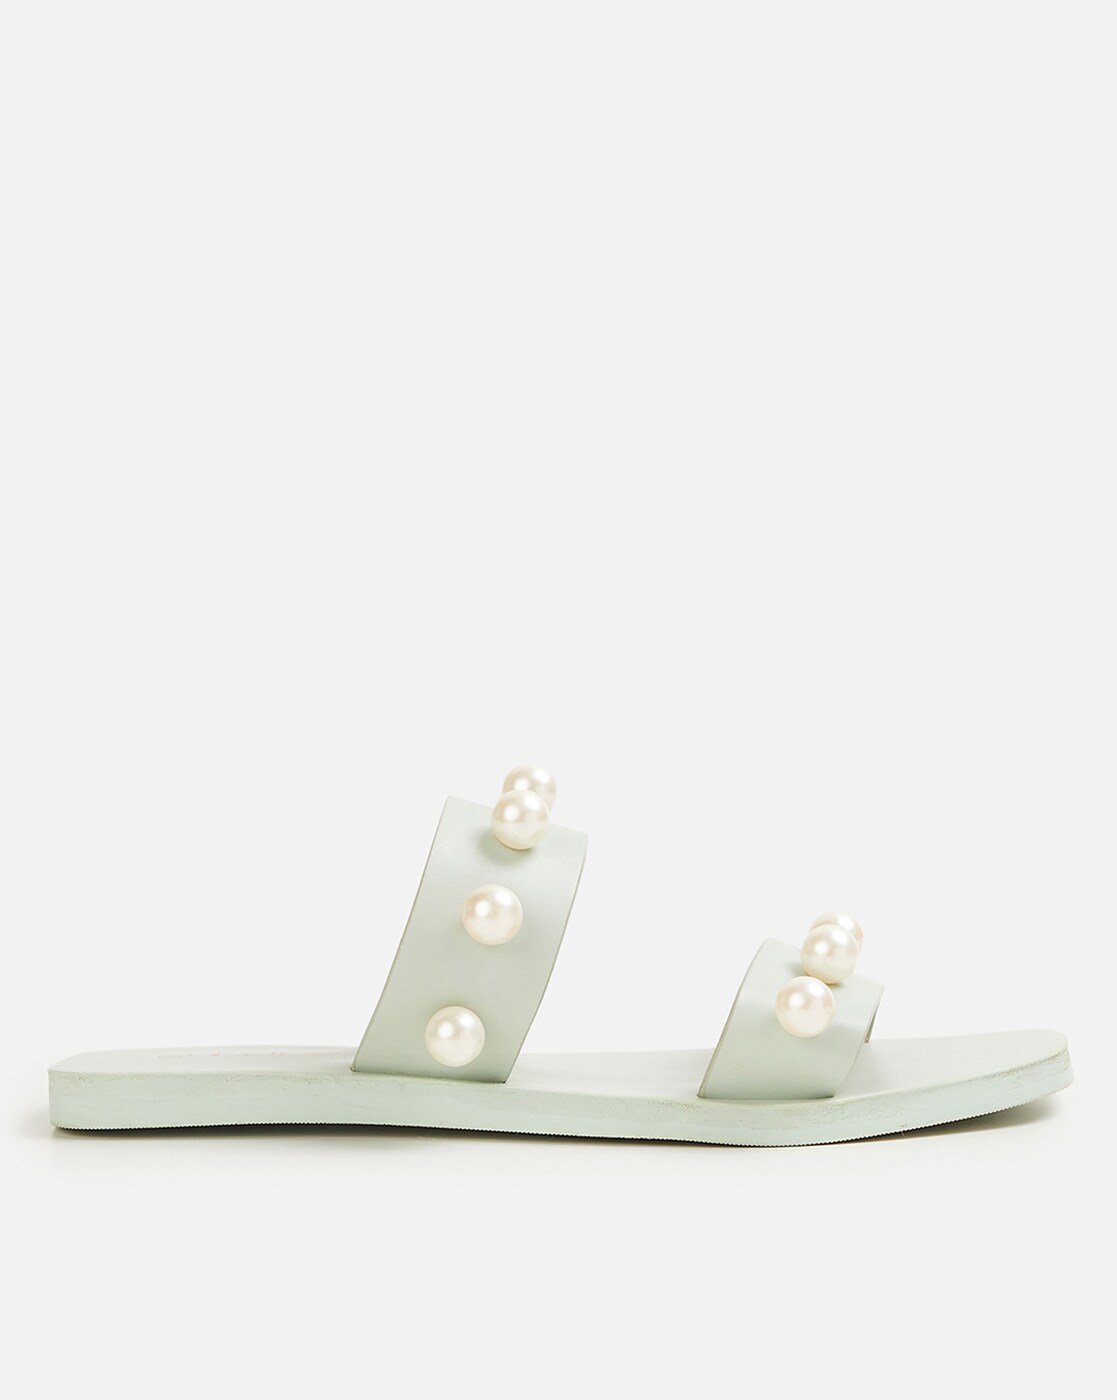 Pearl Shoes: Stuart Weitzman Pearl Slide Sandals | 8 Pairs of Pearl Shoes  to Instantly Upgrade Your Outfit | POPSUGAR Fashion UK Photo 4